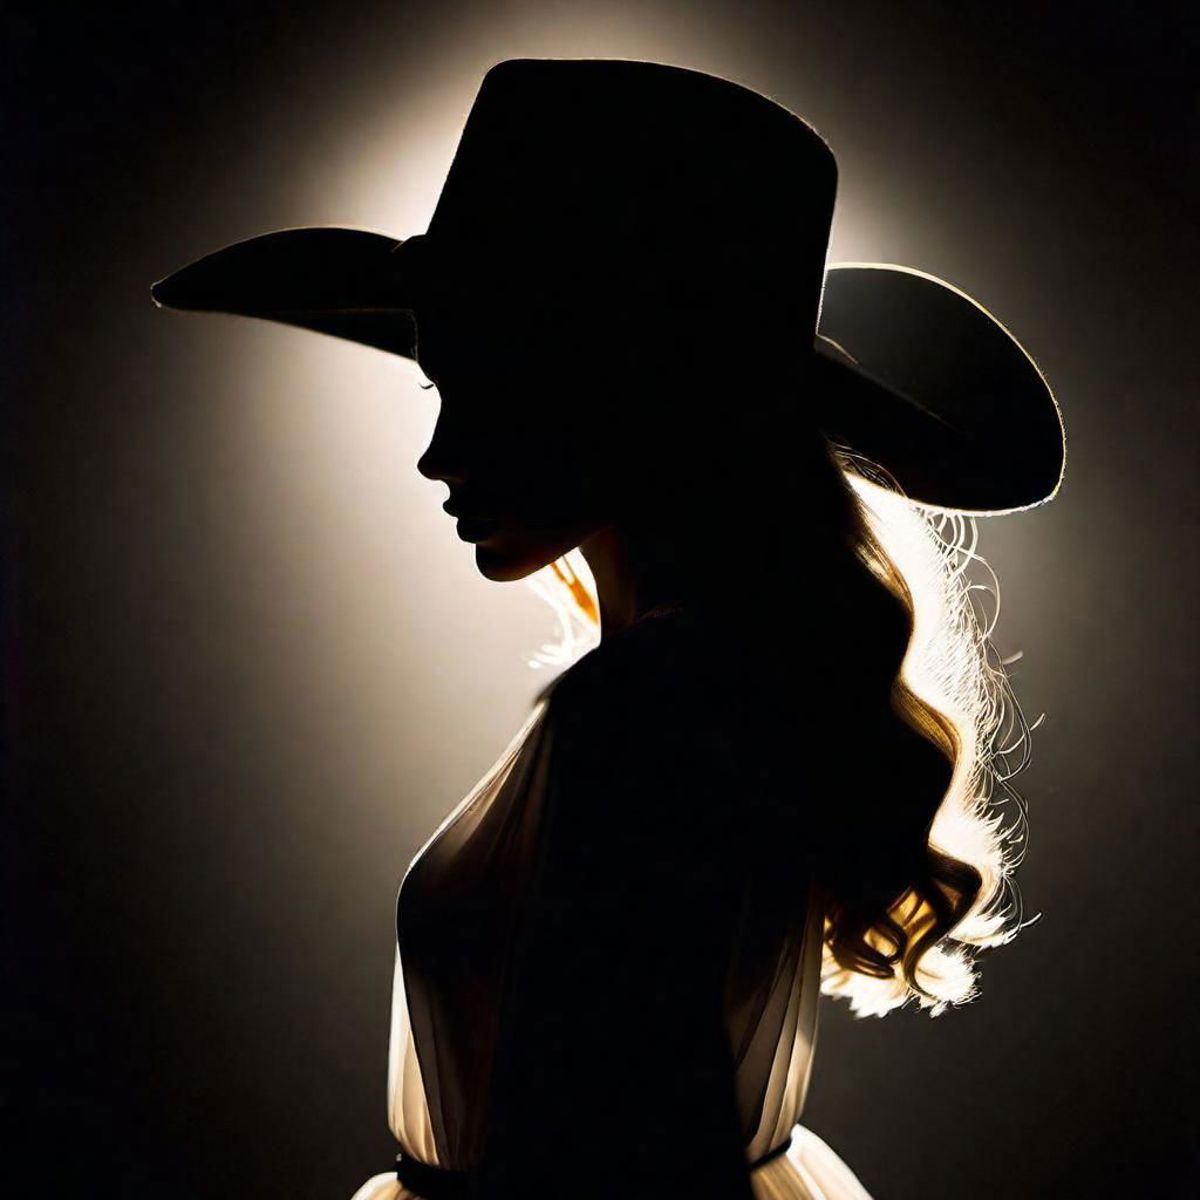 A woman wearing a cowboy hat with a sunlit background.